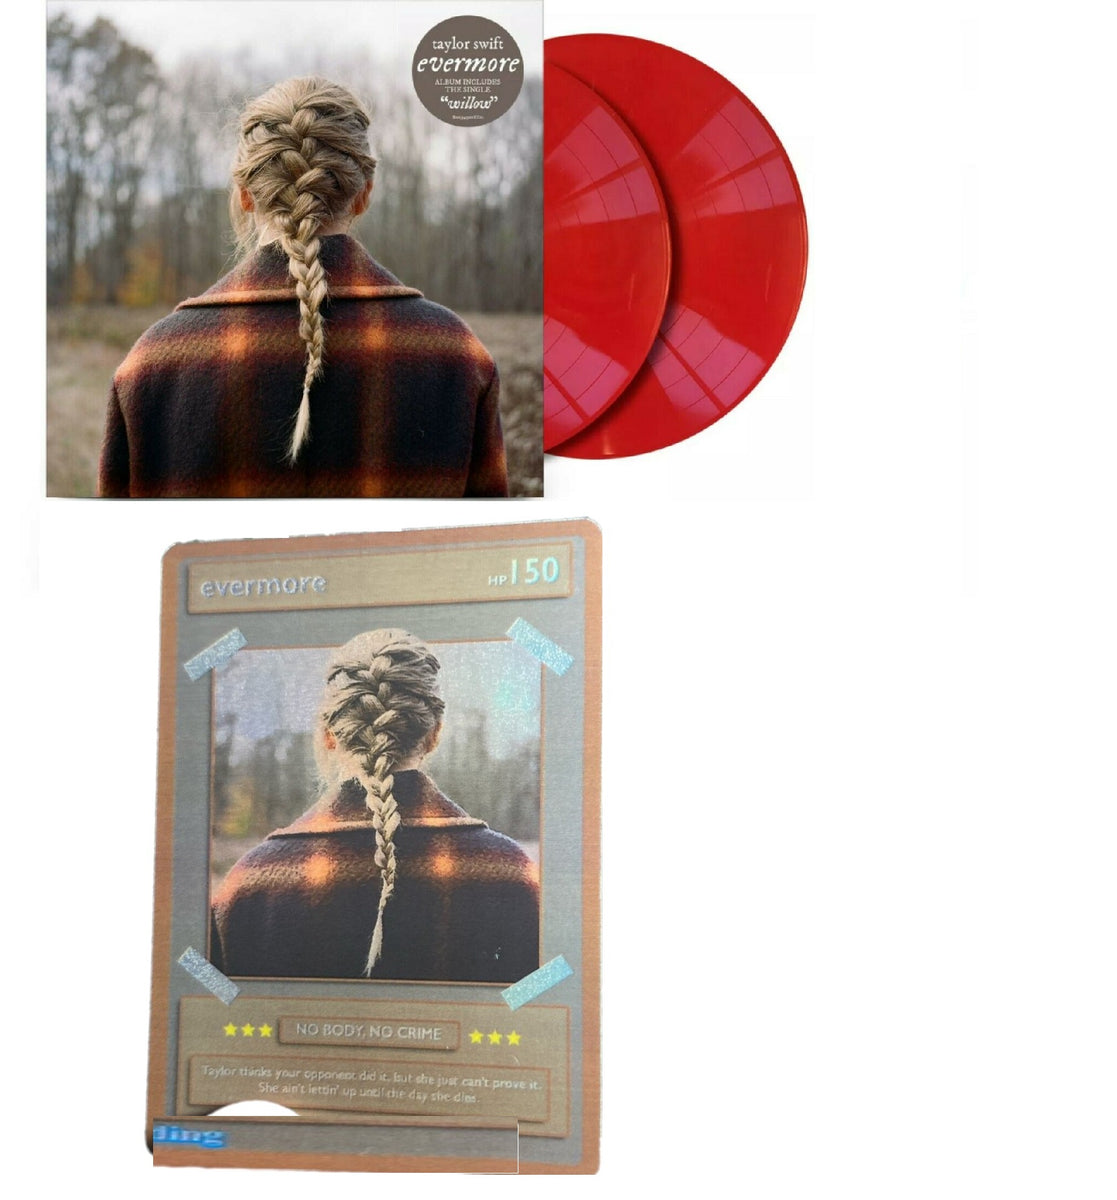 Taylor Swift Releases Evermore Limited Edition to Celebrate Vinyl